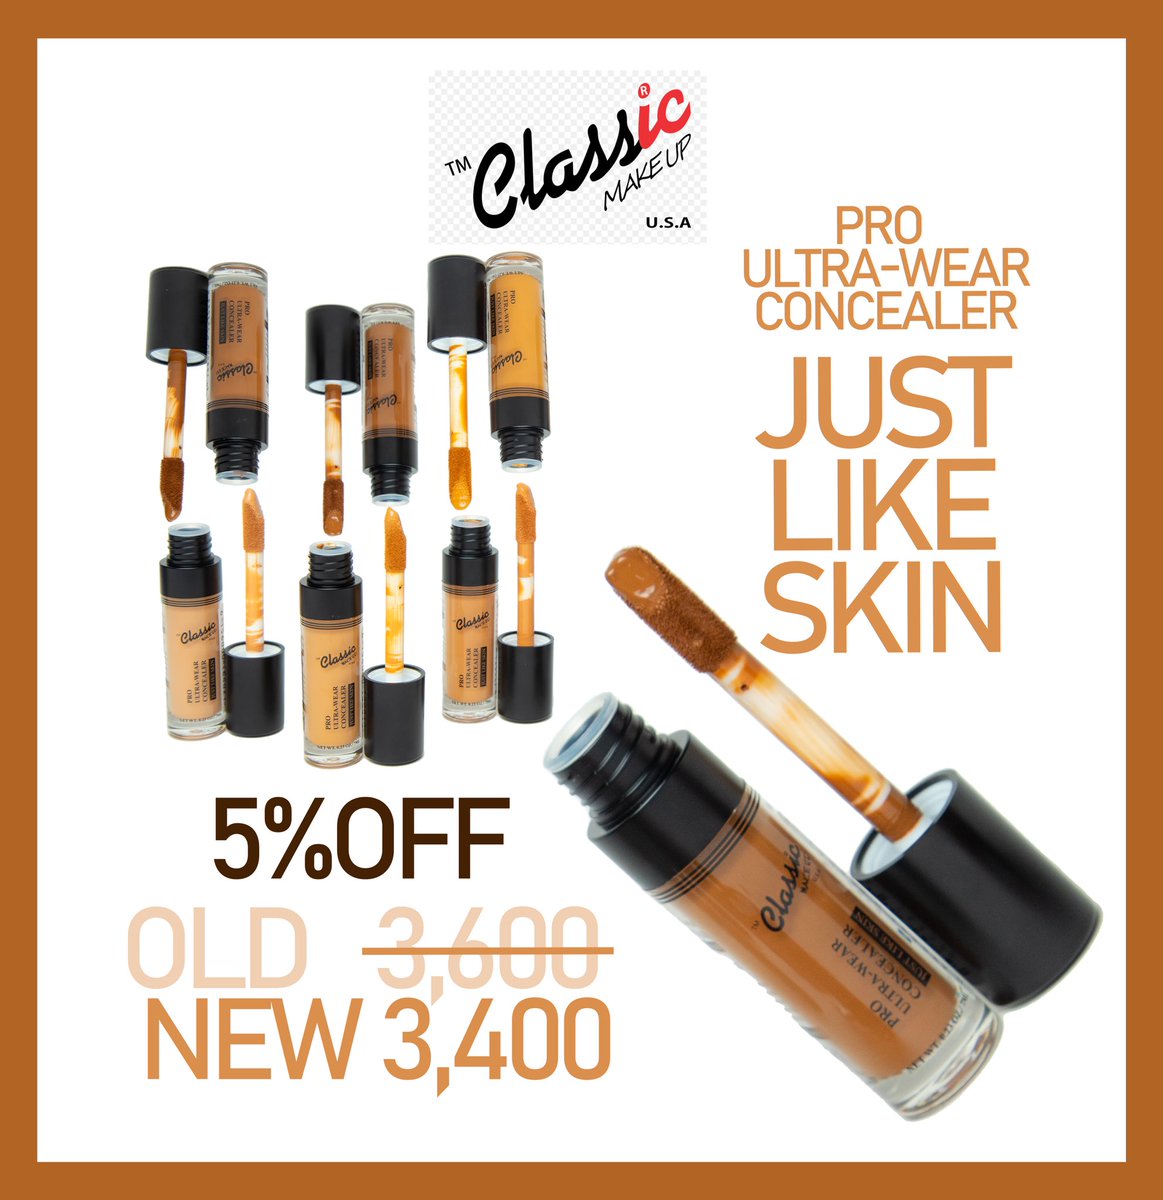 Unveil flawless perfection 🤩 with #ClassicMakeUpUSA PRO ULTRA-WEAR CONCEALER (Just Like Skin) Your secret weapon for impeccable coverage that lasts all day💕 Available in Six stunning shades🌟 🛍️🛍️🛍️ Shop with this promo code VIV1015 and get 5% Discount Sales